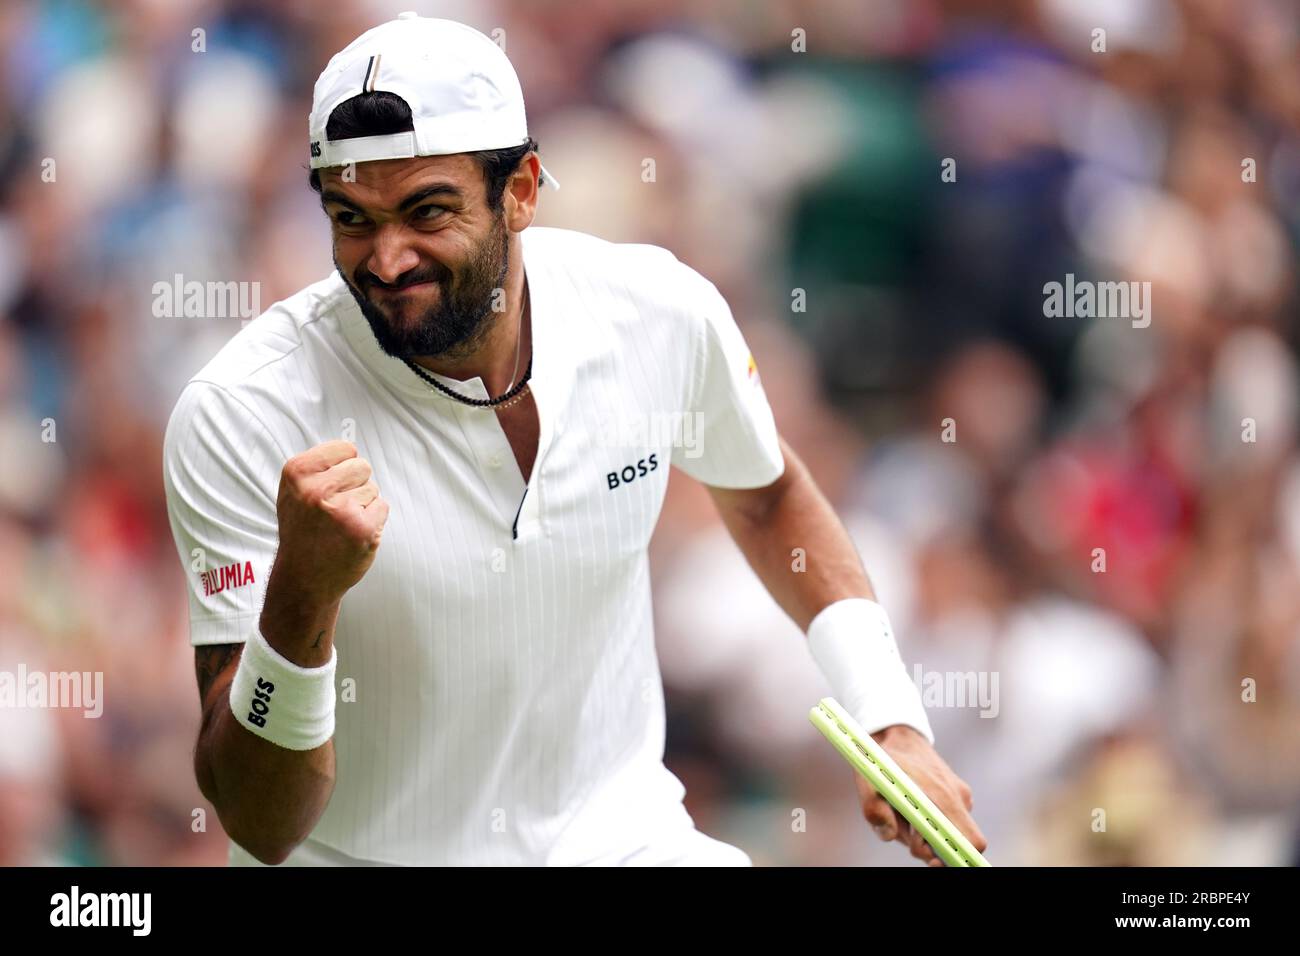 Matteo Berrettini reacts during his match against Carlos Alcaraz (not pictured) on day eight of the 2023 Wimbledon Championships at the All England Lawn Tennis and Croquet Club in Wimbledon